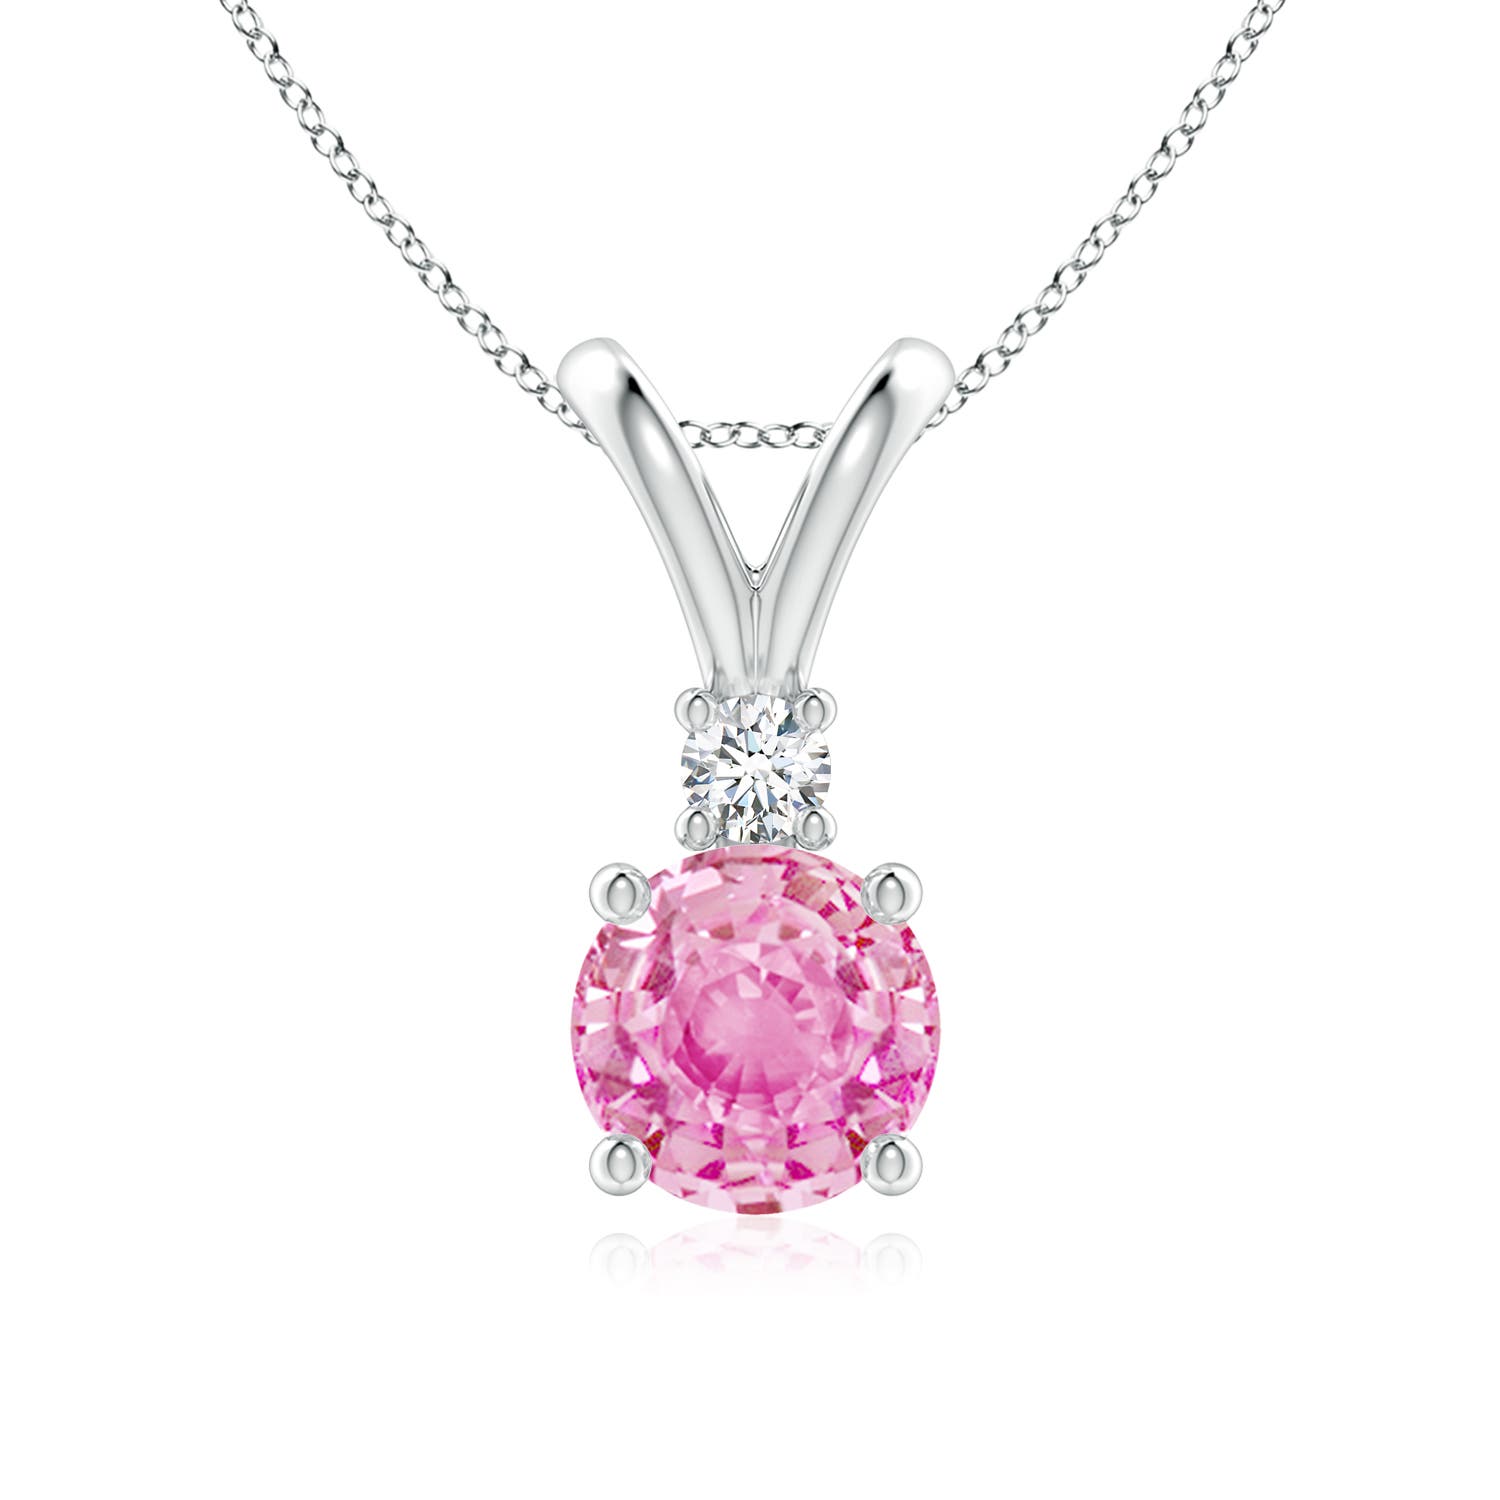 A - Pink Sapphire / 1.67 CT / 14 KT White Gold